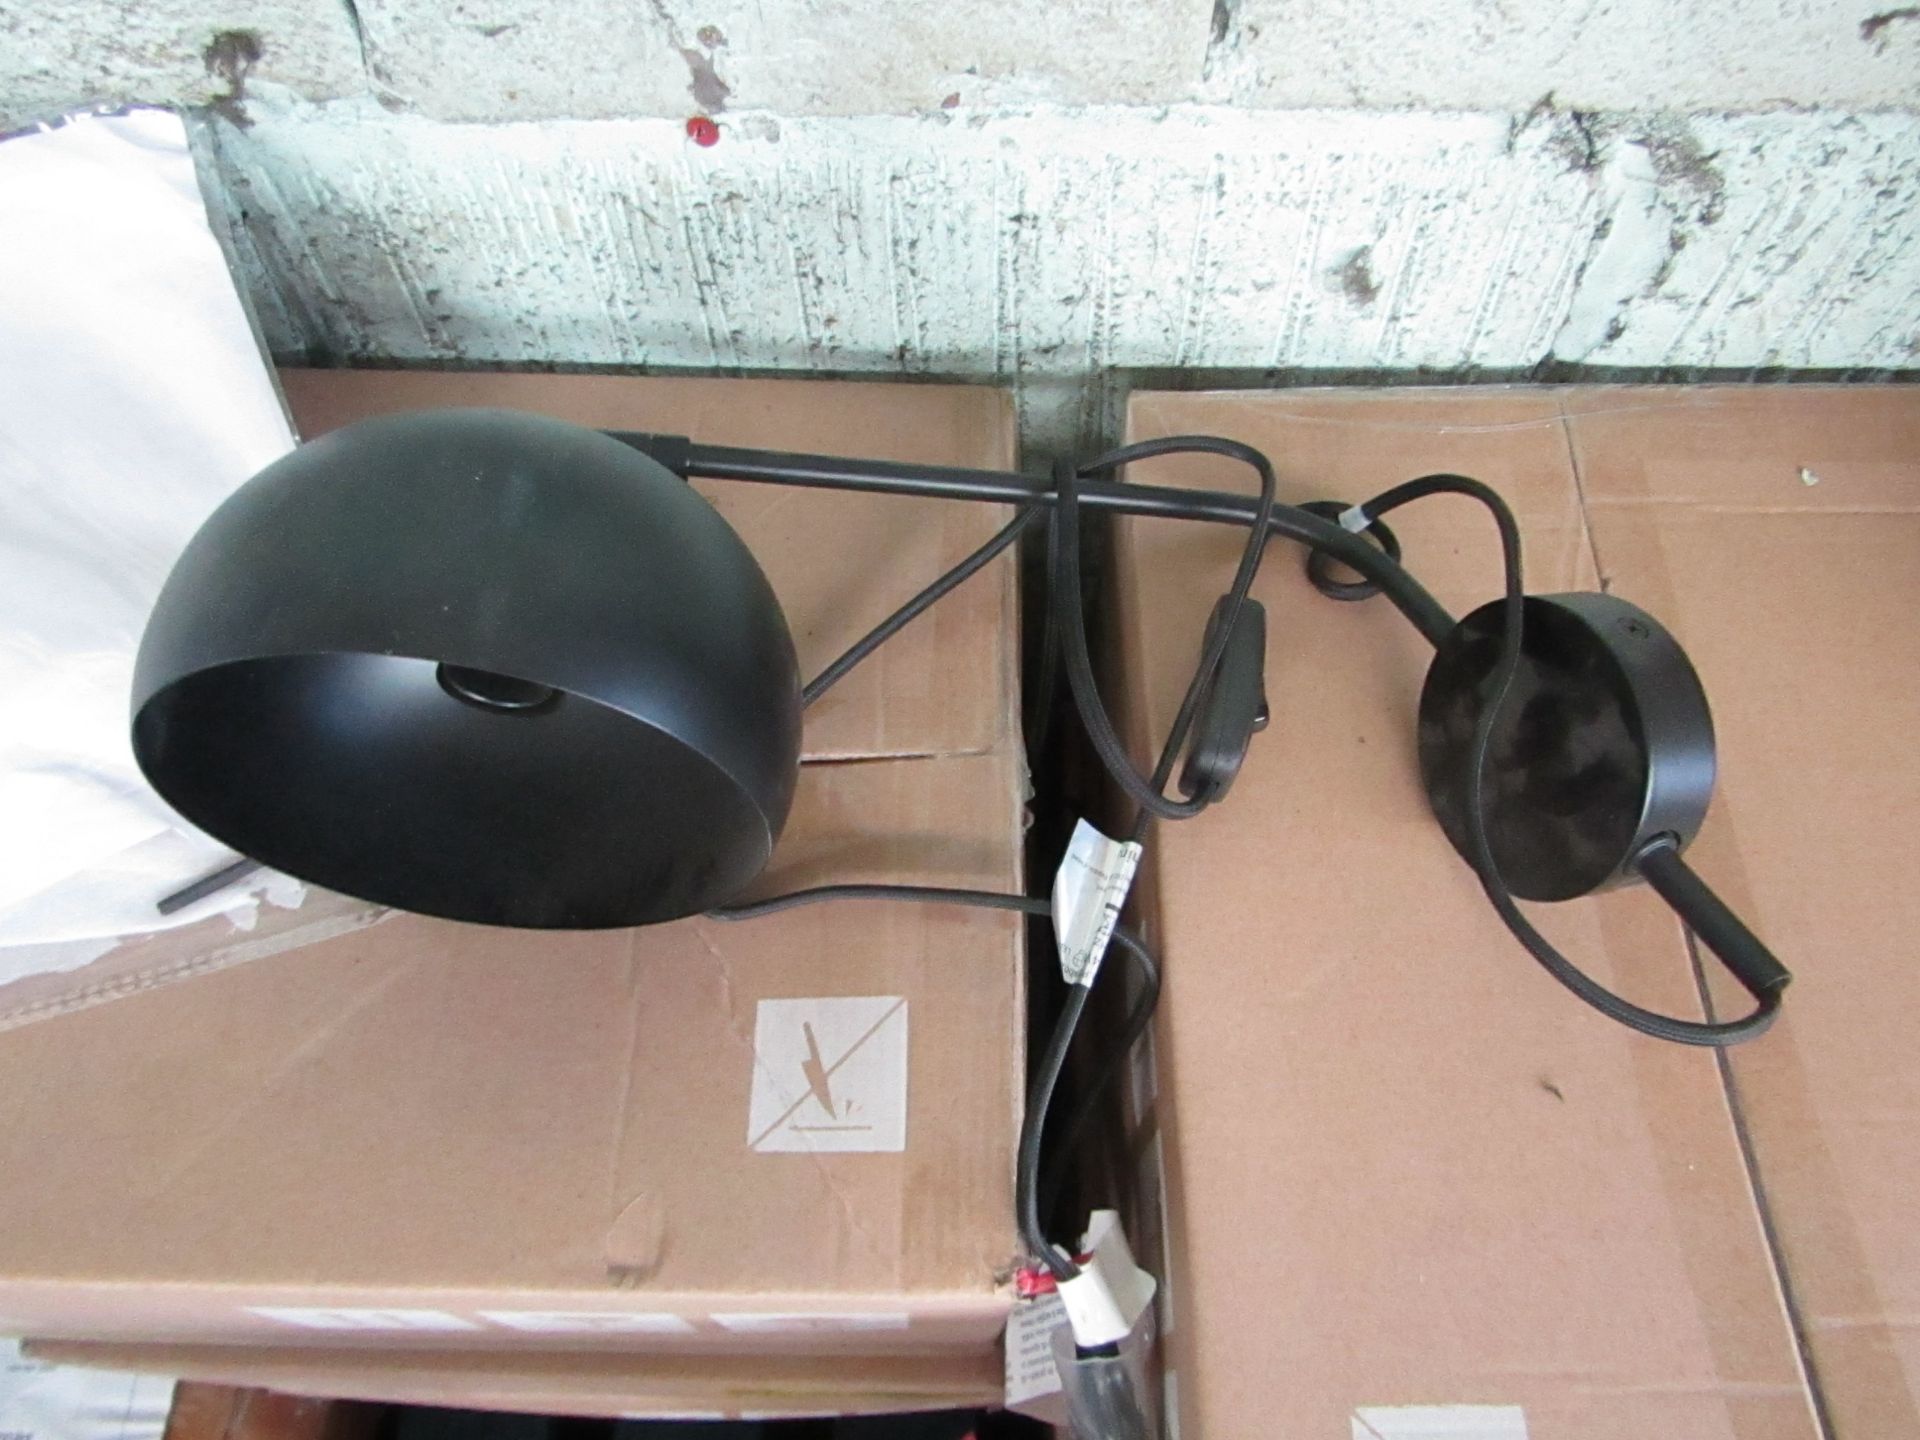 3x Made.com Troupe Wall Light, Black - Unchecked & Boxed & Appears to be a Auro Plug.